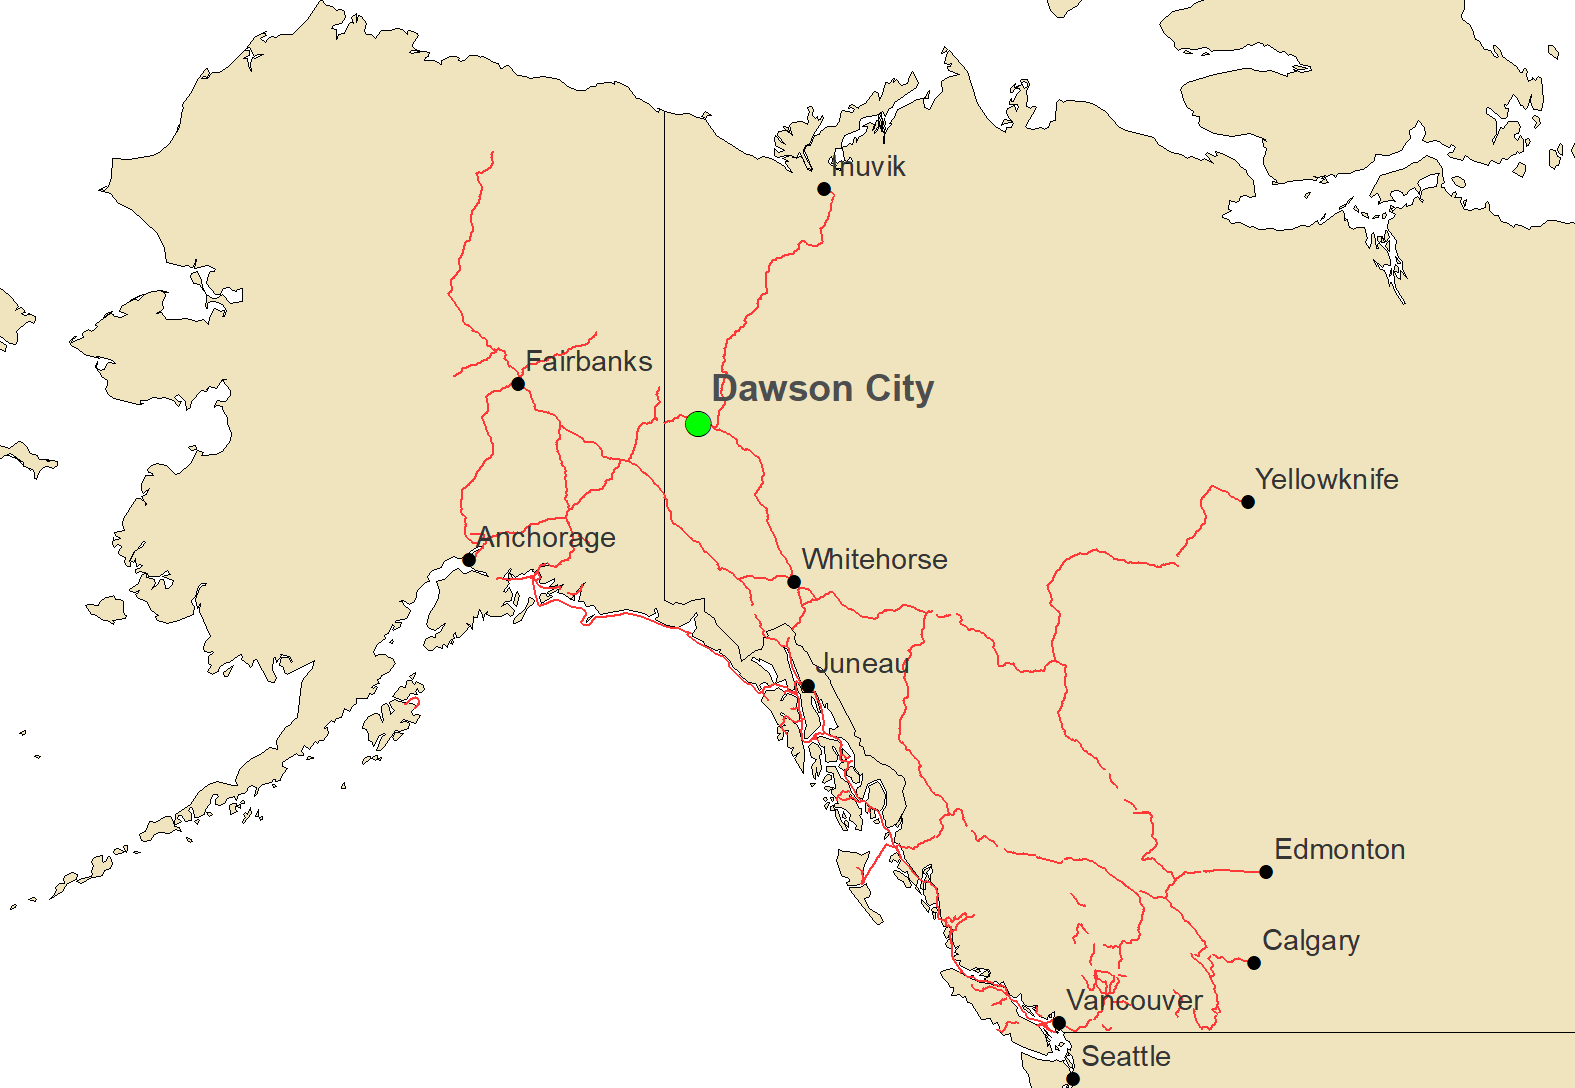 map of alaska and western canada showing the location of Dawson City